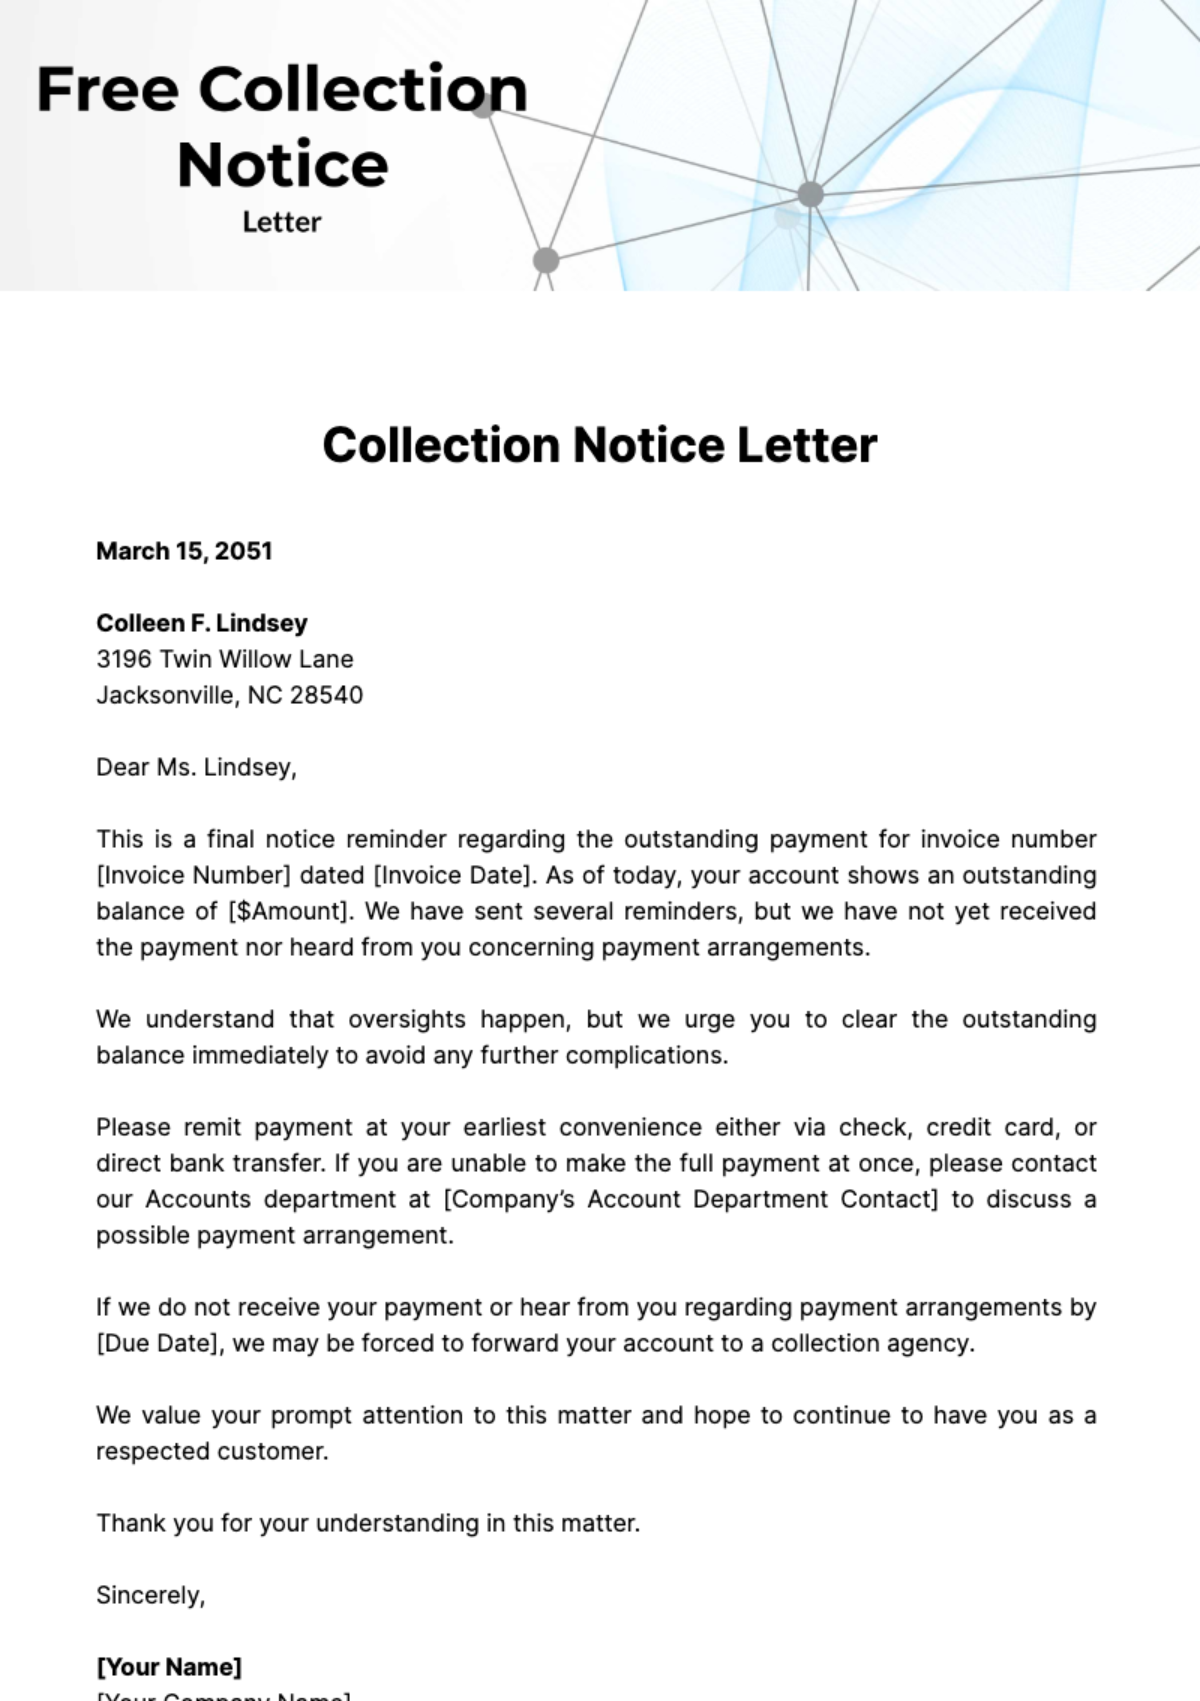 Free Collection Notice Letter Template